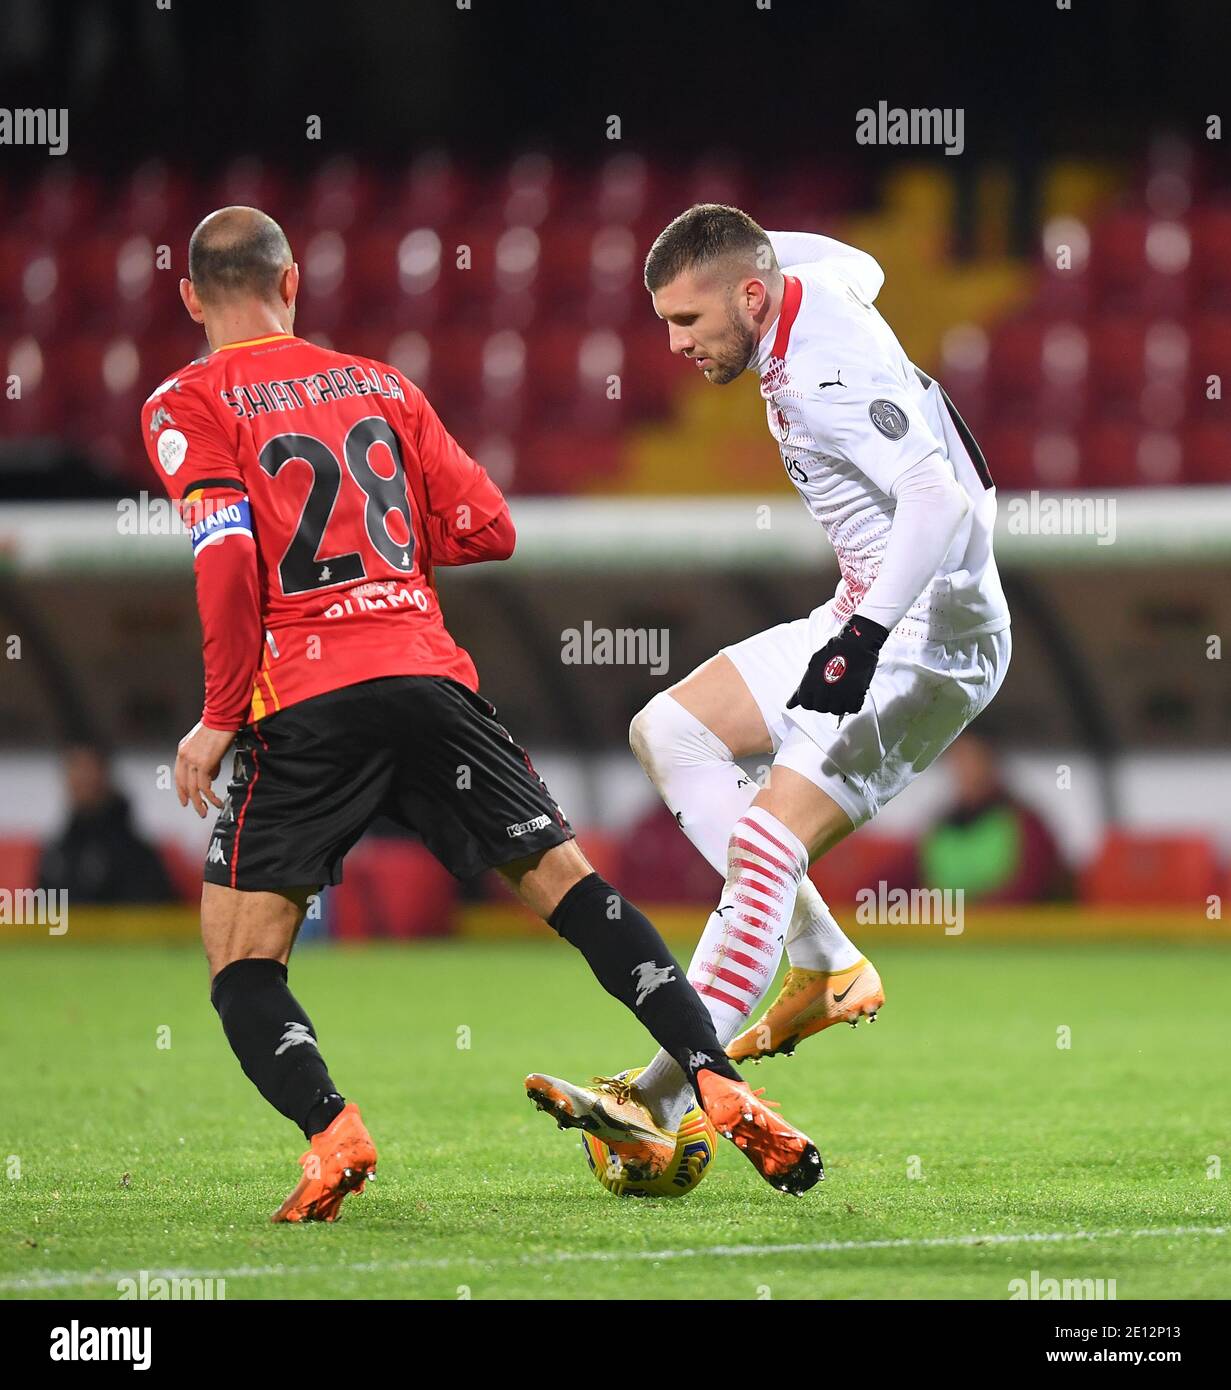 Benevento, Italy. 3rd Jan, 2021. AC Milan's Ante Rebic (R) vies with Benevento's Pasquale Schiattarella during a Serie A match between Benevento and AC Milan in Benevento, Italy, Jan. 3, 2021. Credit: Daniele Mascolo/Xinhua/Alamy Live News Stock Photo